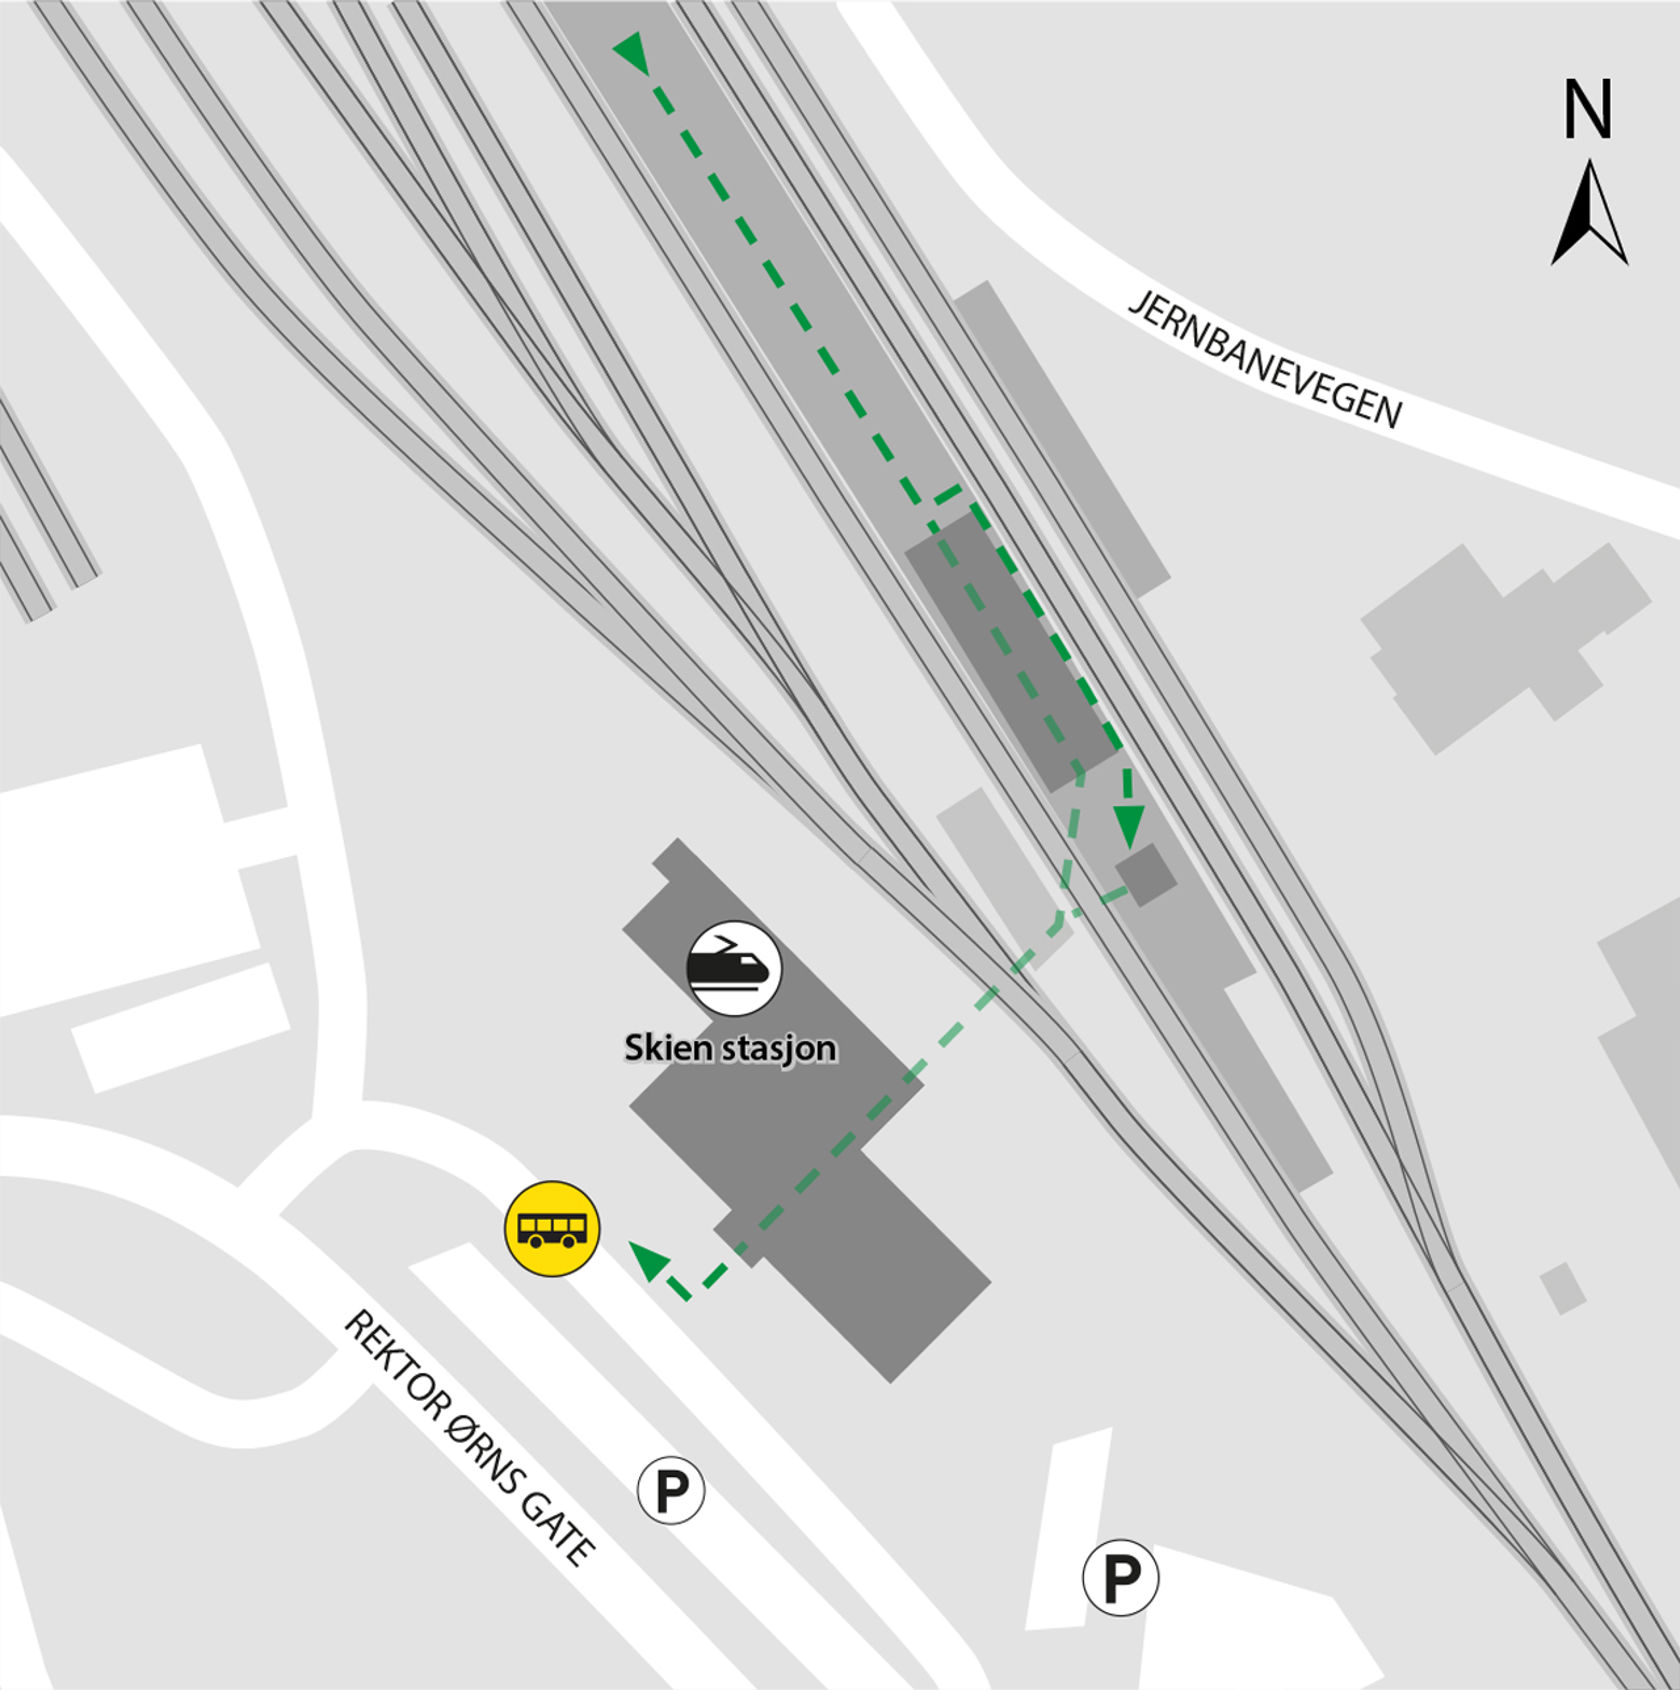 Map shows rail replacement service departs from bus stop Skien station. 